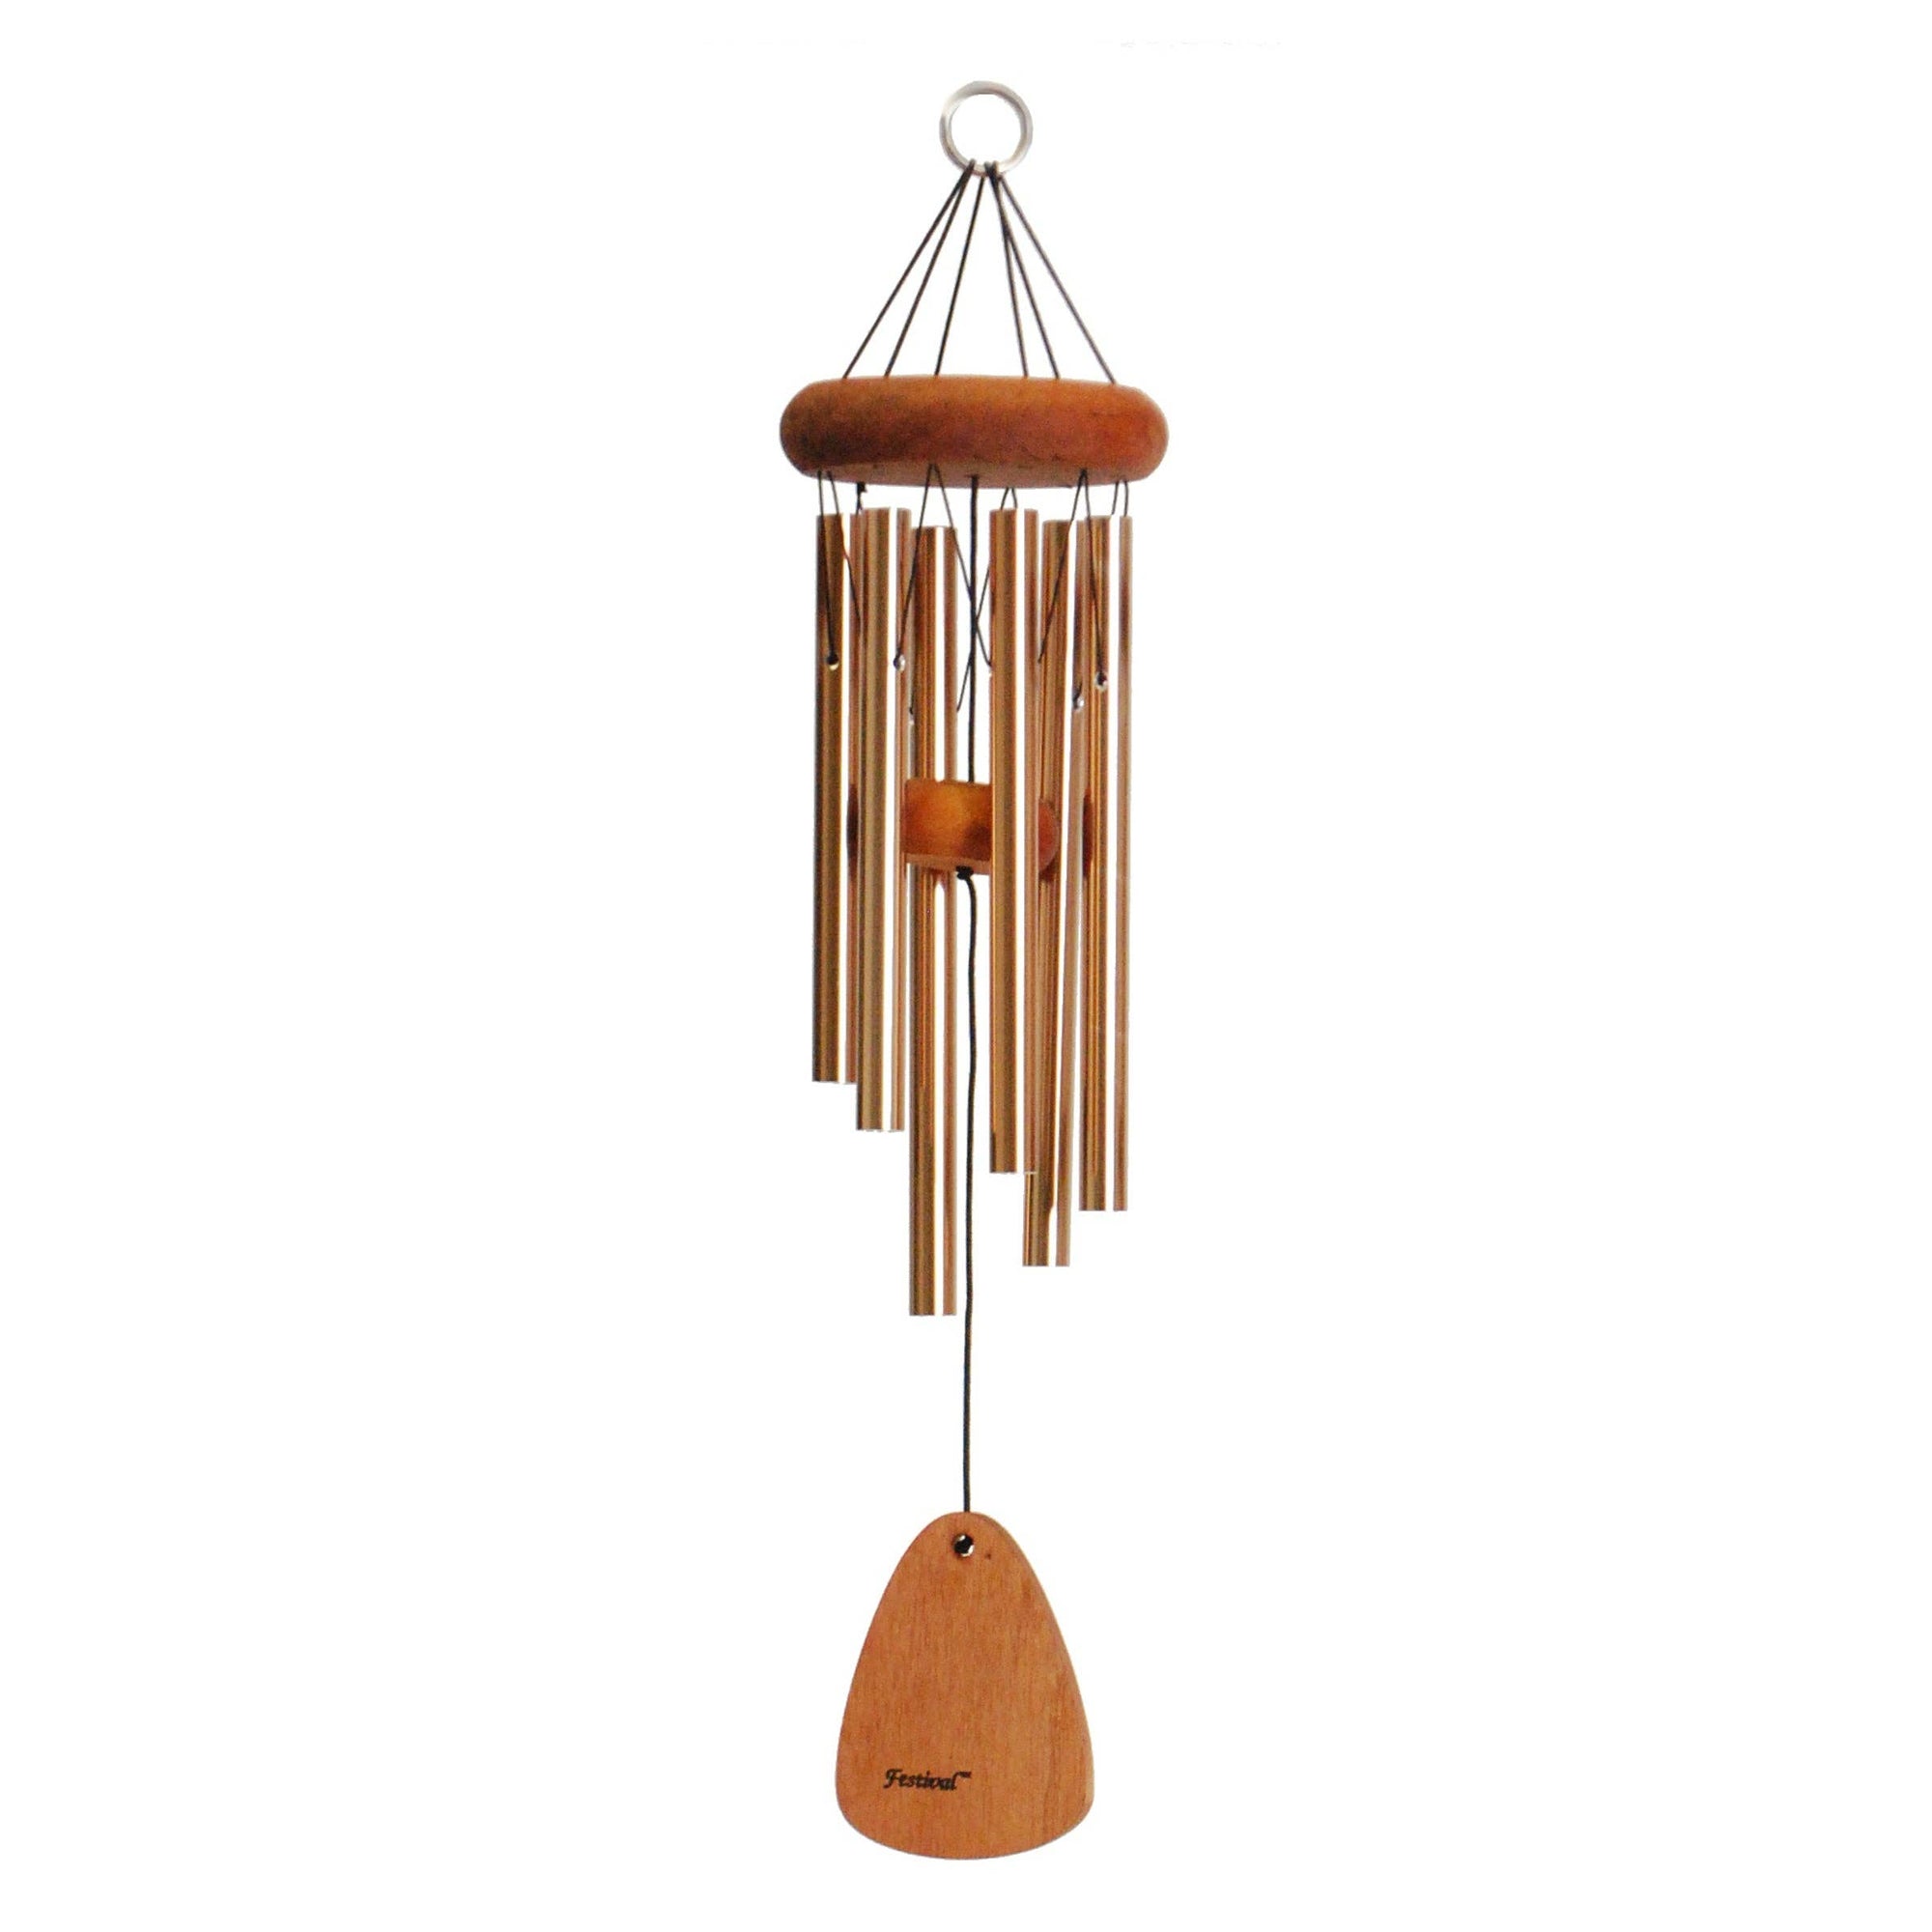 A Festival® 18-inch Windchime with wood, a perfect accent piece for any Festival®.